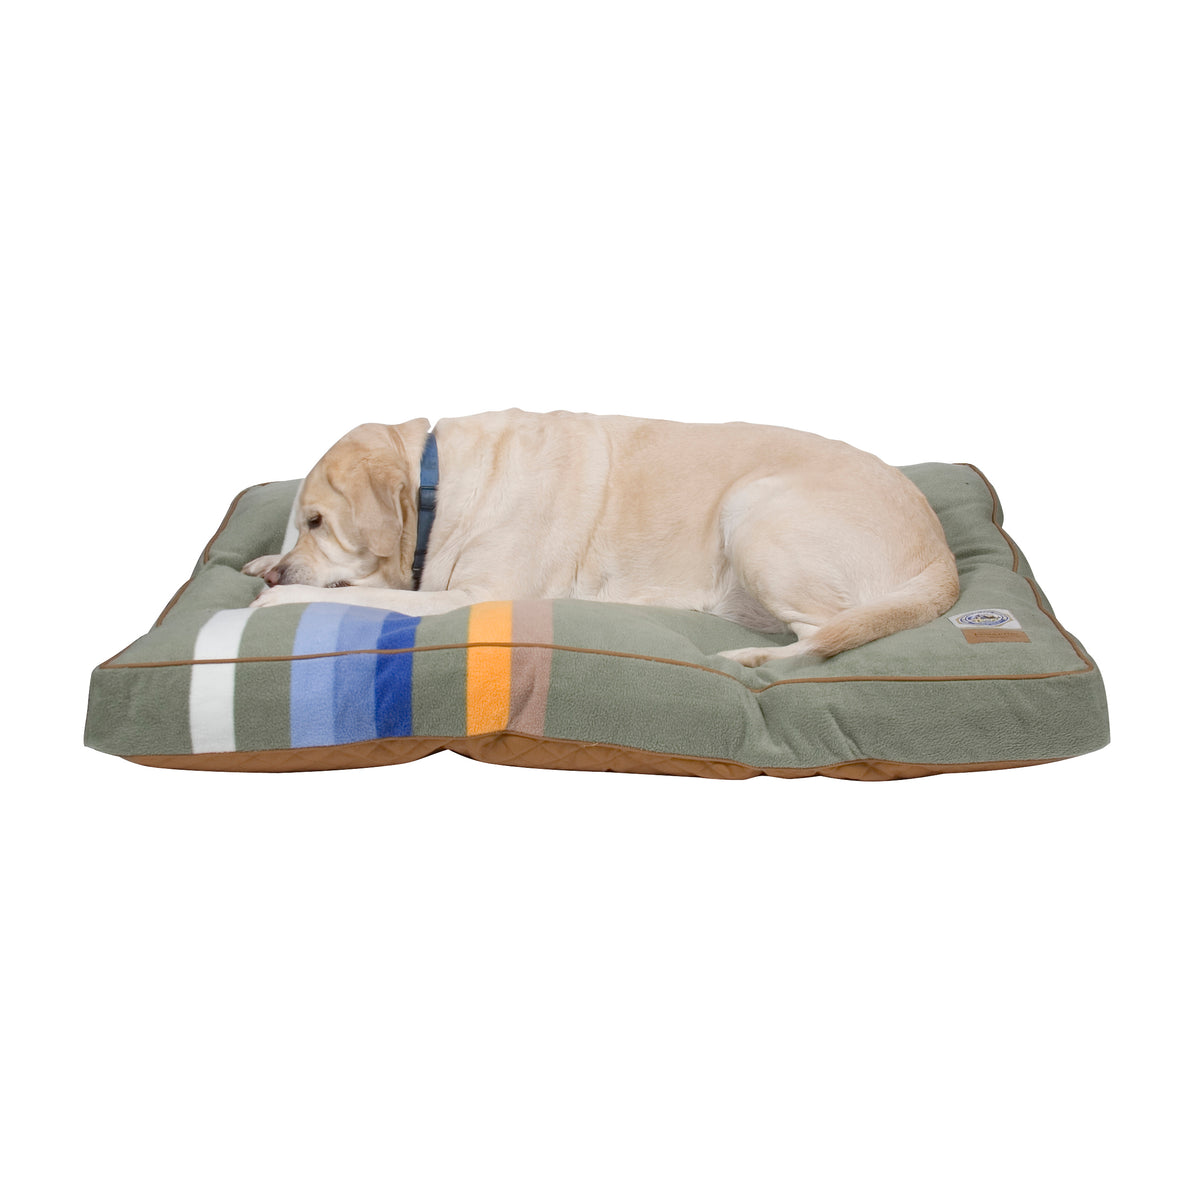 Lab on Rocky Mountain National Park Dog Bed